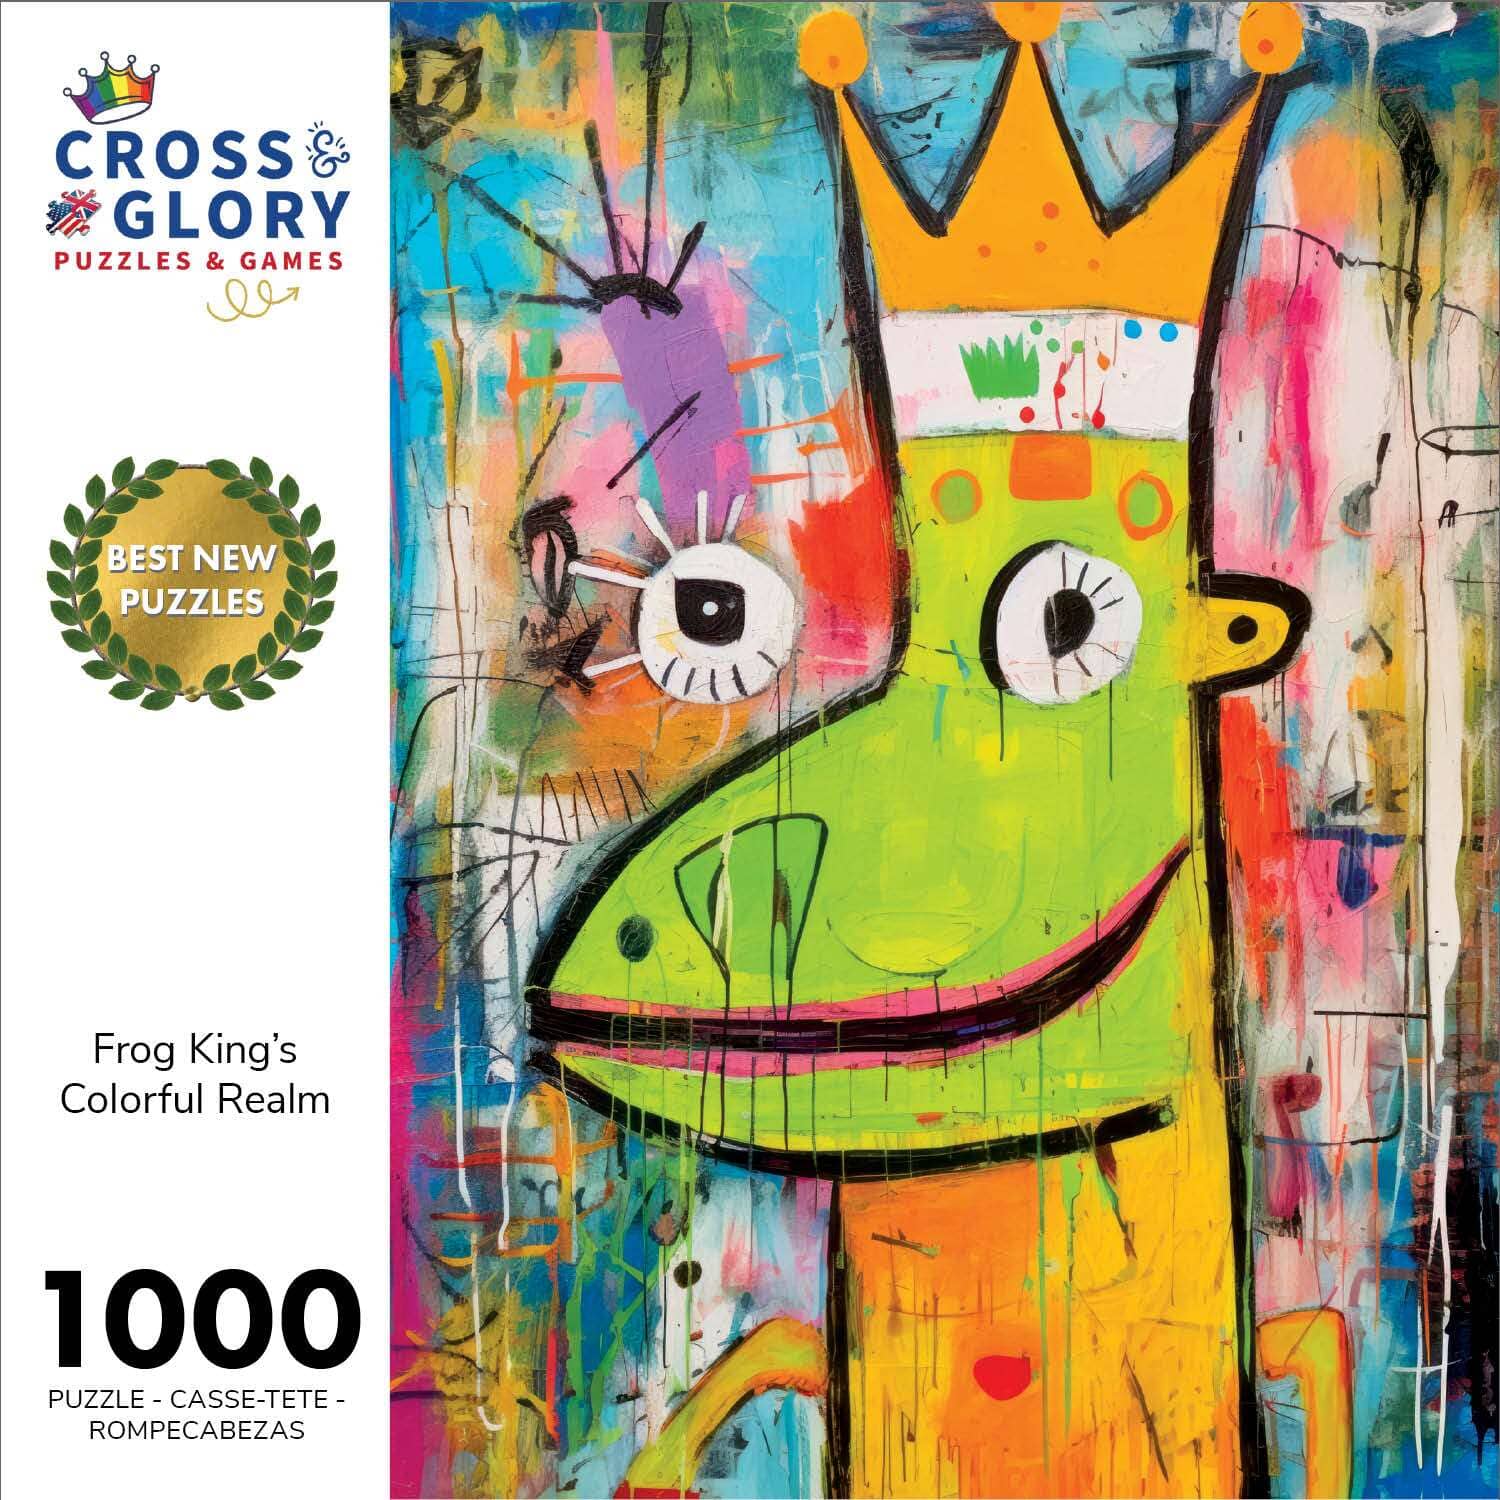 Frog King's Colorful Realm - 1000 Piece Jigsaw Puzzle Jigsaw Puzzles Cross & Glory